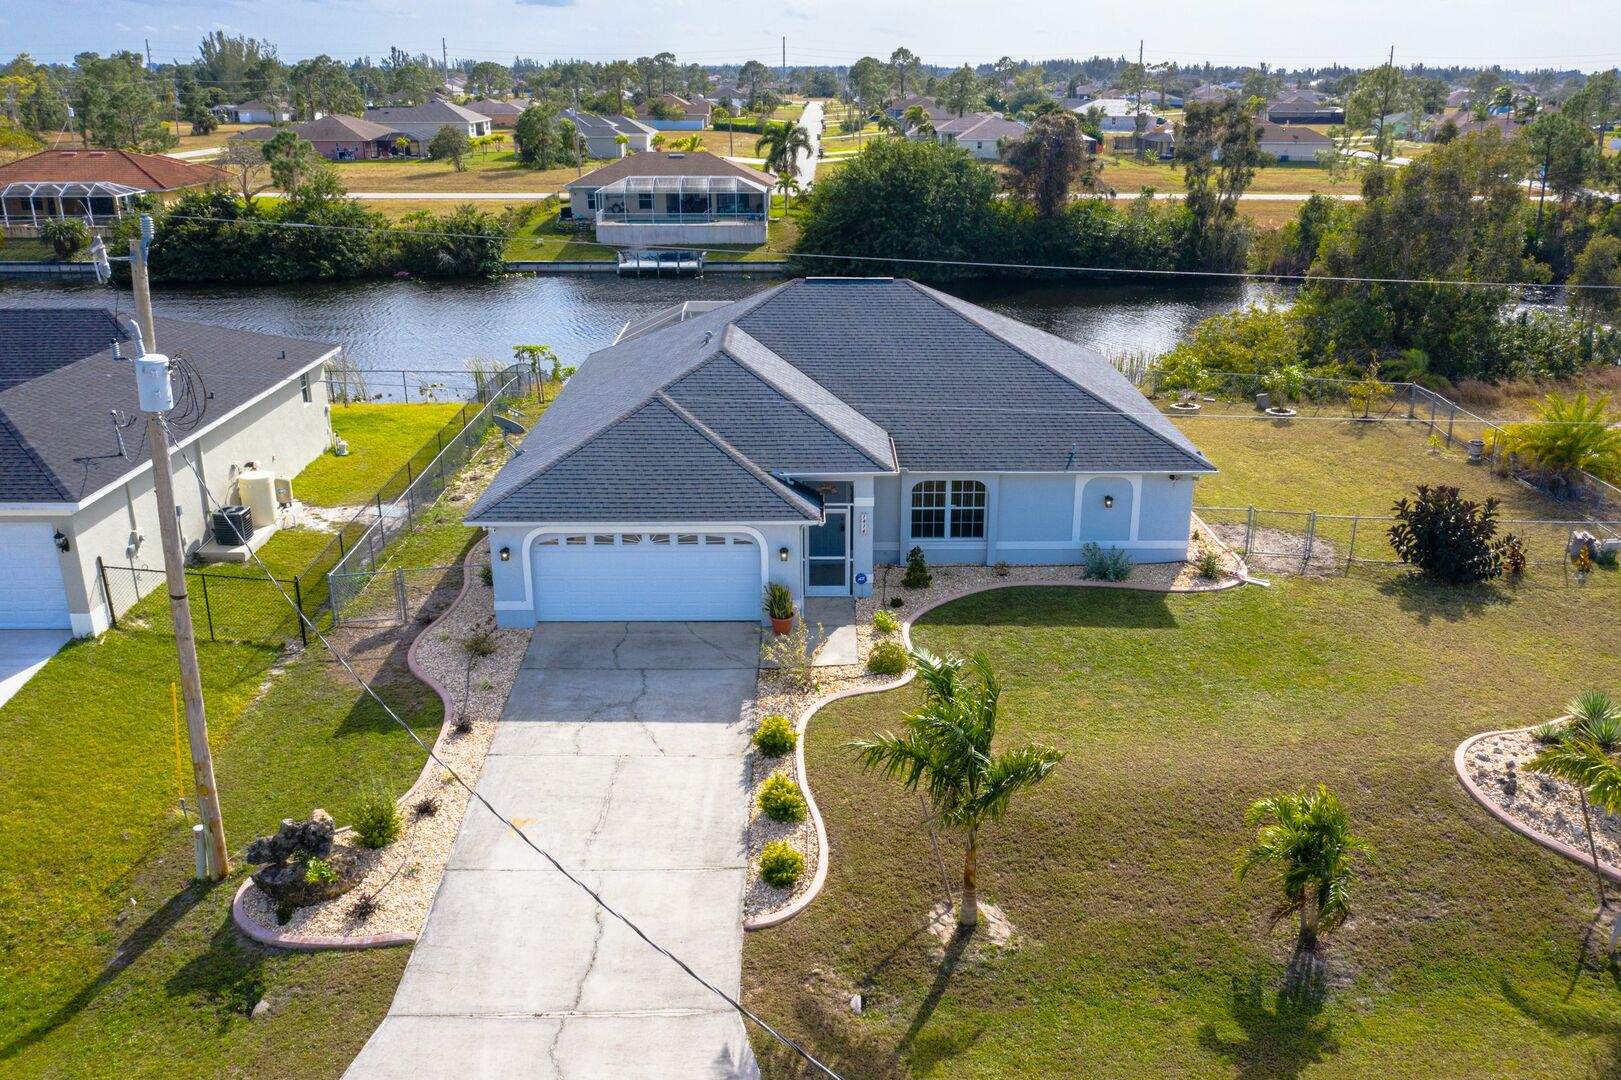 3 bedroom Cape Coral Vacation Home